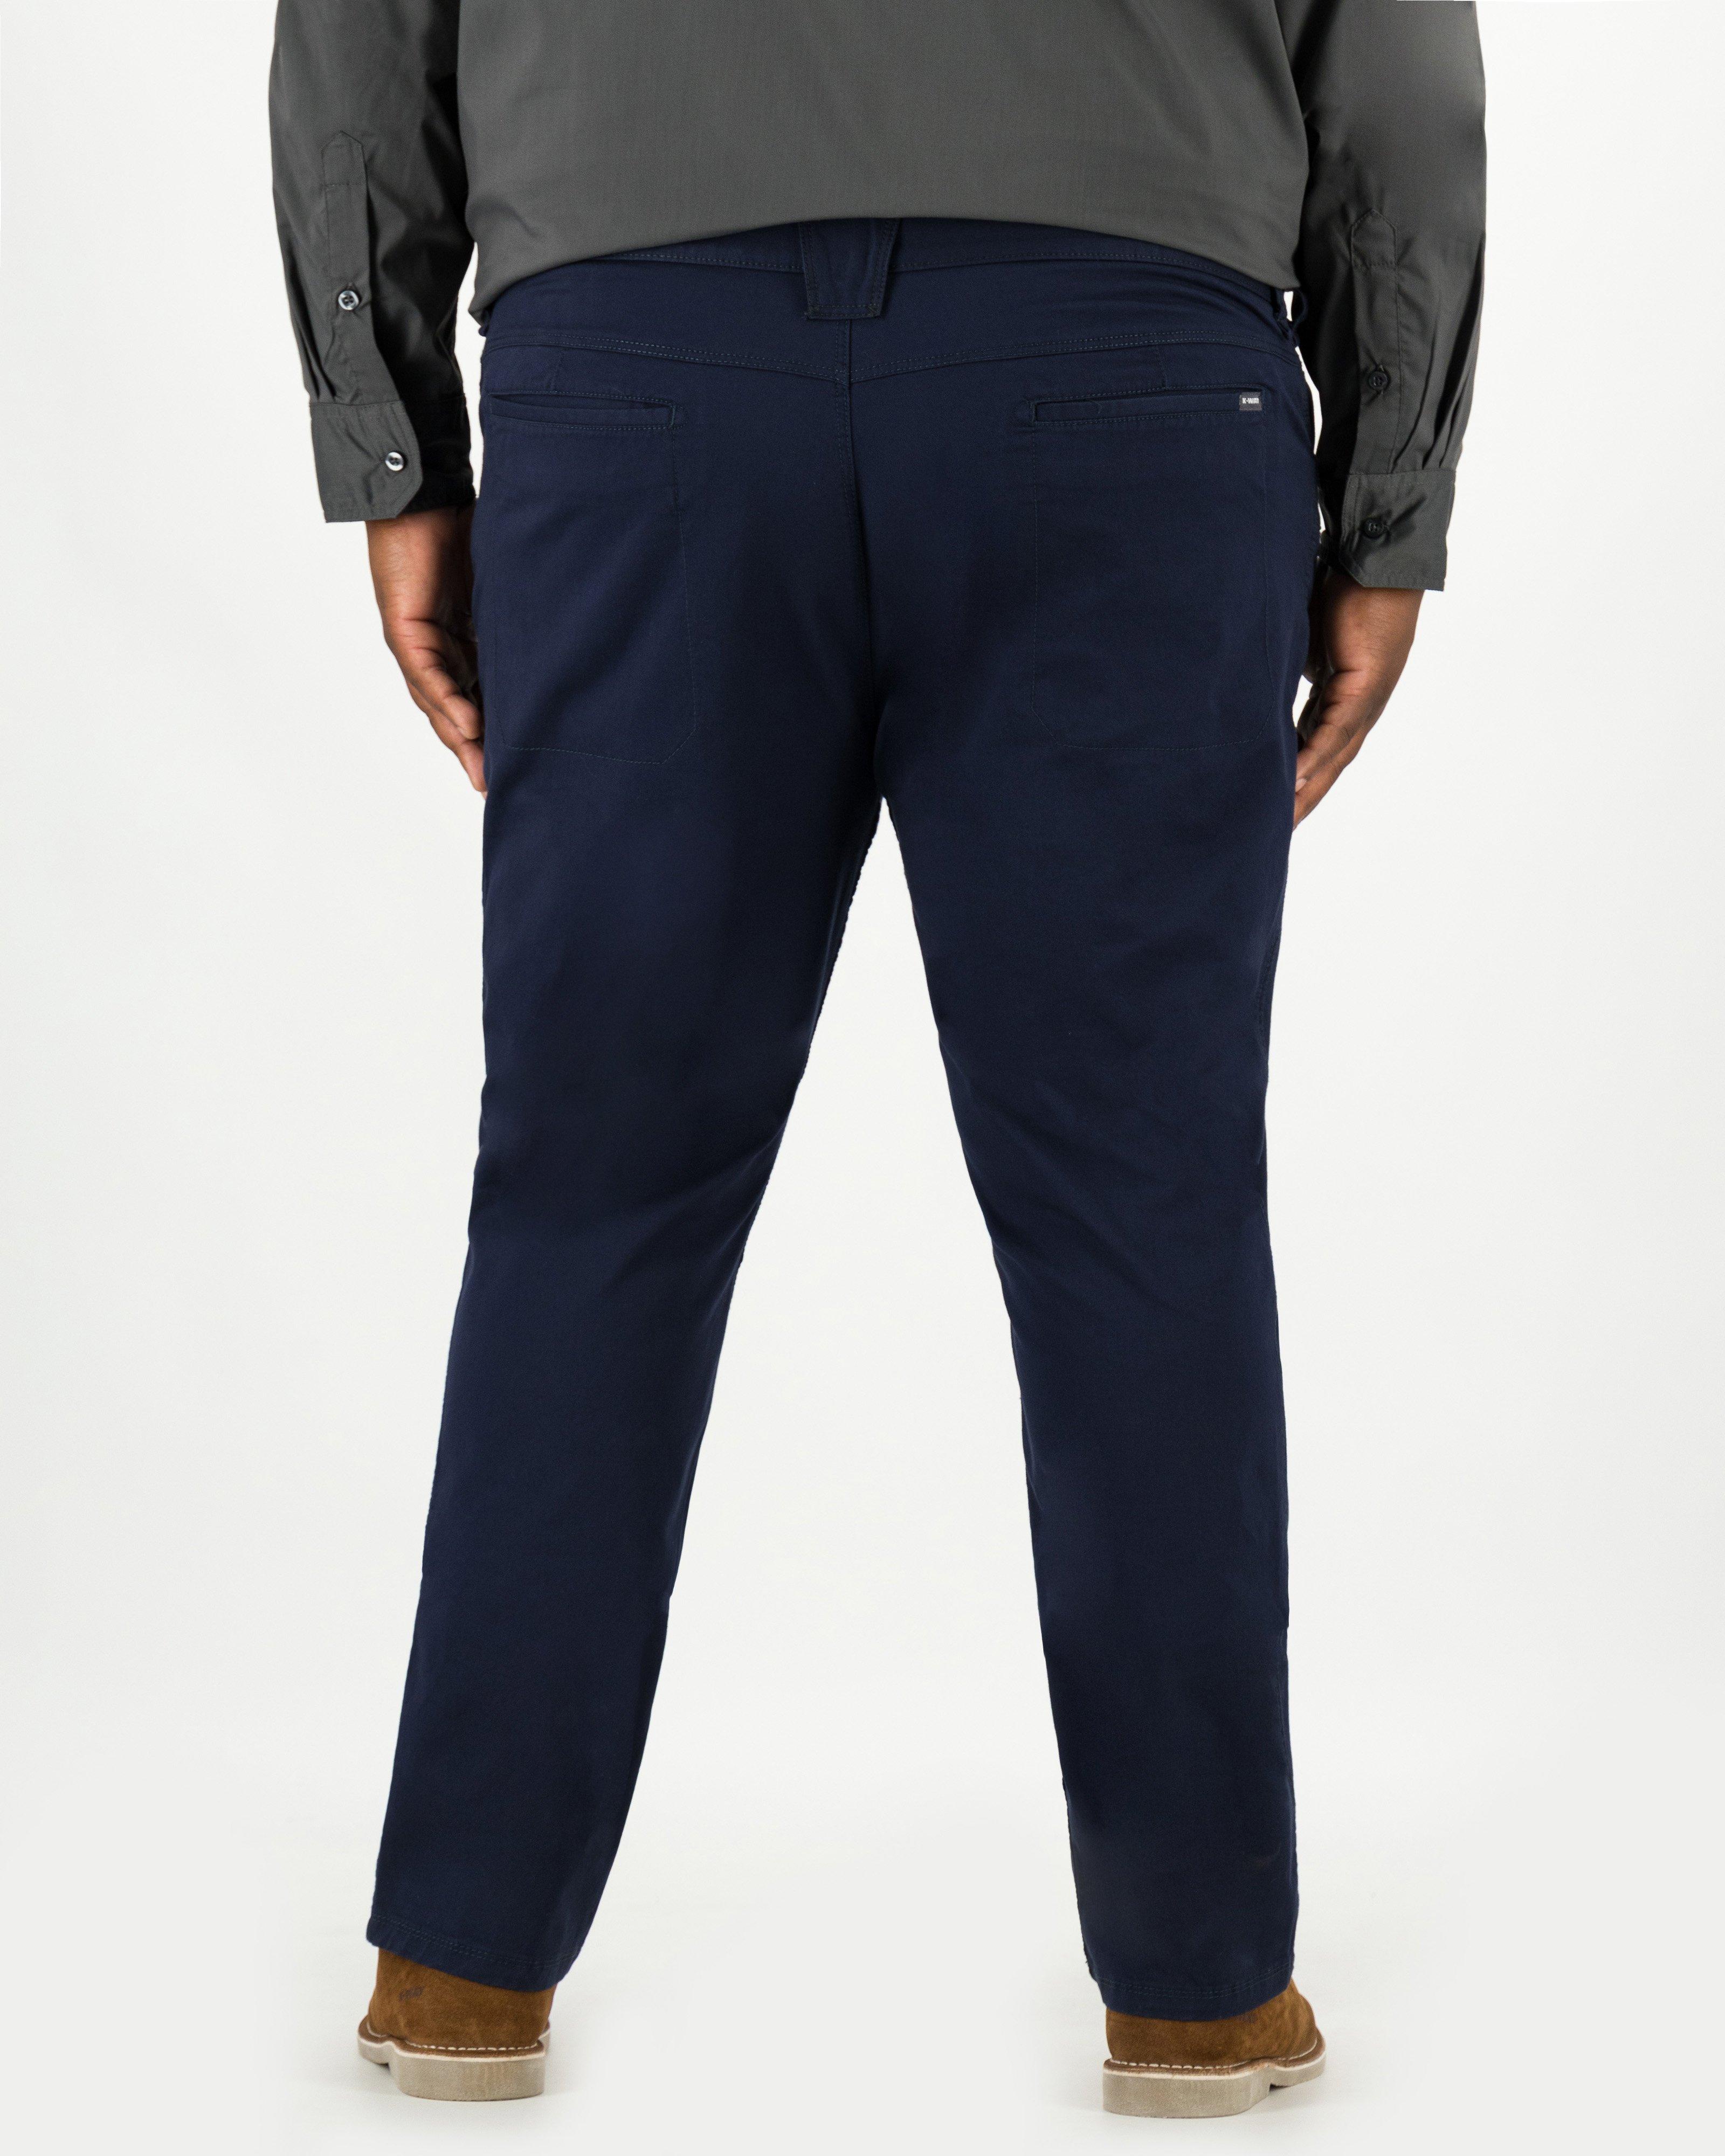 K-Way Elements Men’s Travel Chinos Extended Sizes -  Navy